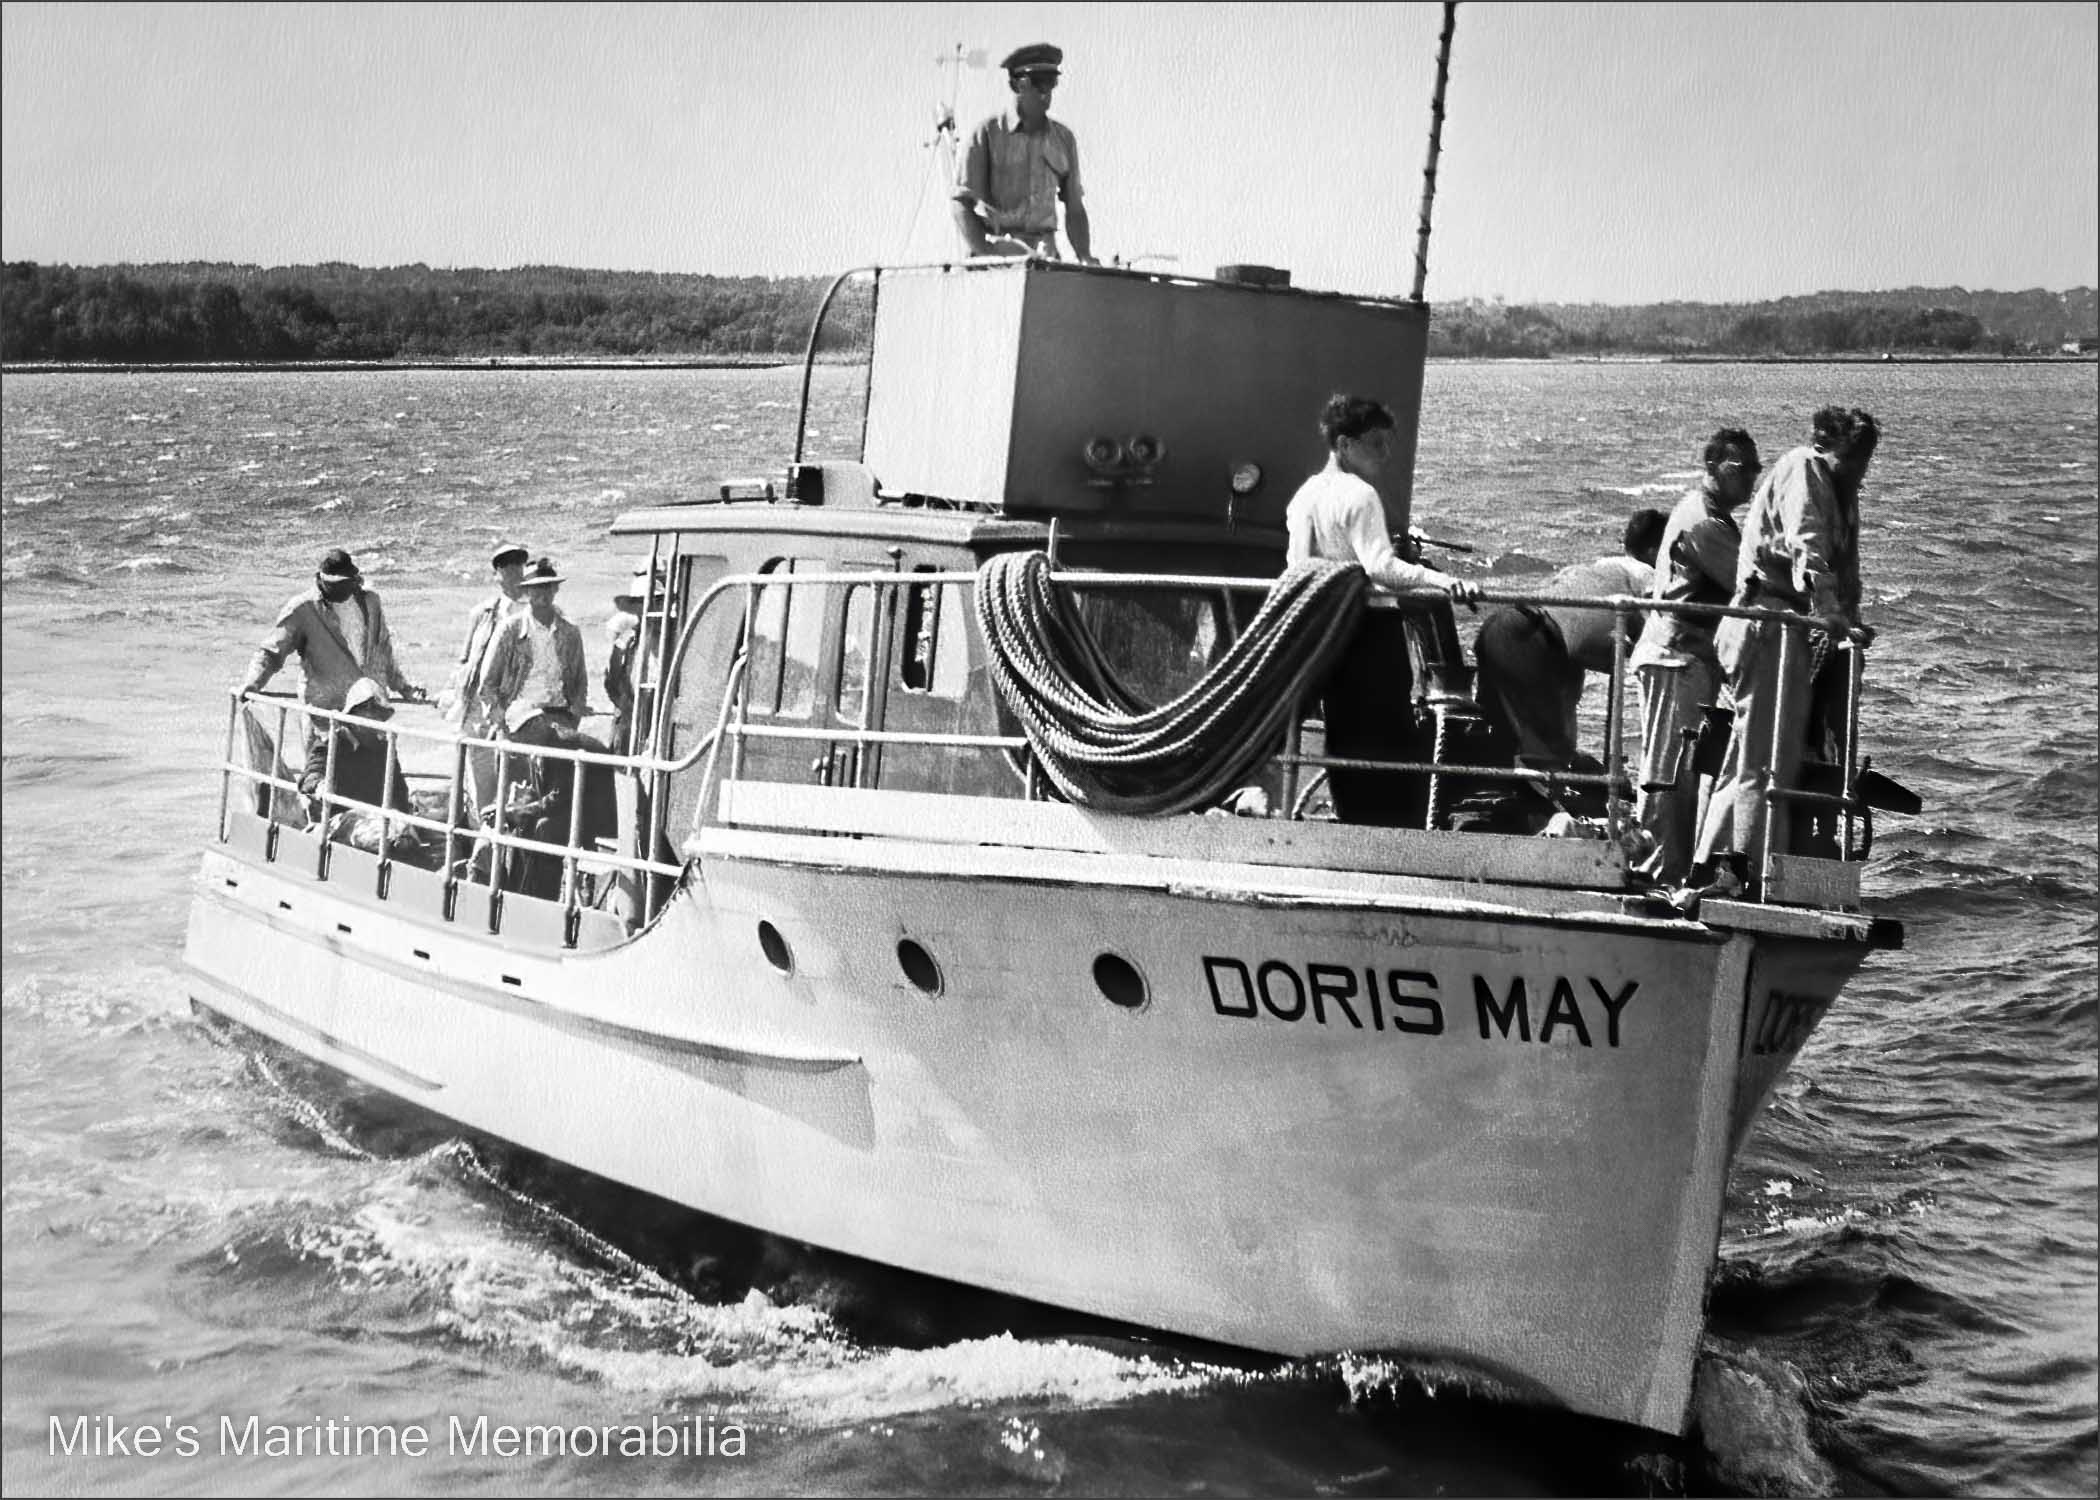 DORIS MAY, Belmar, NJ – 1944 The "DORIS MAY" from Belmar, NJ circa 1944. Built in 1940 by Wheeler Shipyard at Brooklyn, NY, she was powered by twin 100 HP six-cylinder Chrysler Crown gasoline engines. The "DORIS MAY" was owned and operated by Captain Harry Pflug. She was sold in 1949 to Captain Jimmy Carves and became his "BELBOY II", and sailed from Great Kills, Staten Island, NY. She was sold again in 1950 and became Captain Edward Carroll’s "PELICAN" from Montauk, NY. Sadly, the "PELICAN" capsized capsized on December 1, 1951 one mile north of Montauk Lighthouse while returning from a fishing trip during stormy weather and 45 persons, including the Captain, lost their lives. At the time, for-hire boats like the "PELICAN" were not subject to annual inspection and certification by the U.S. Coast Guard, but the tragedy was the catalyst for significant legislative changes to the party fishing industry.